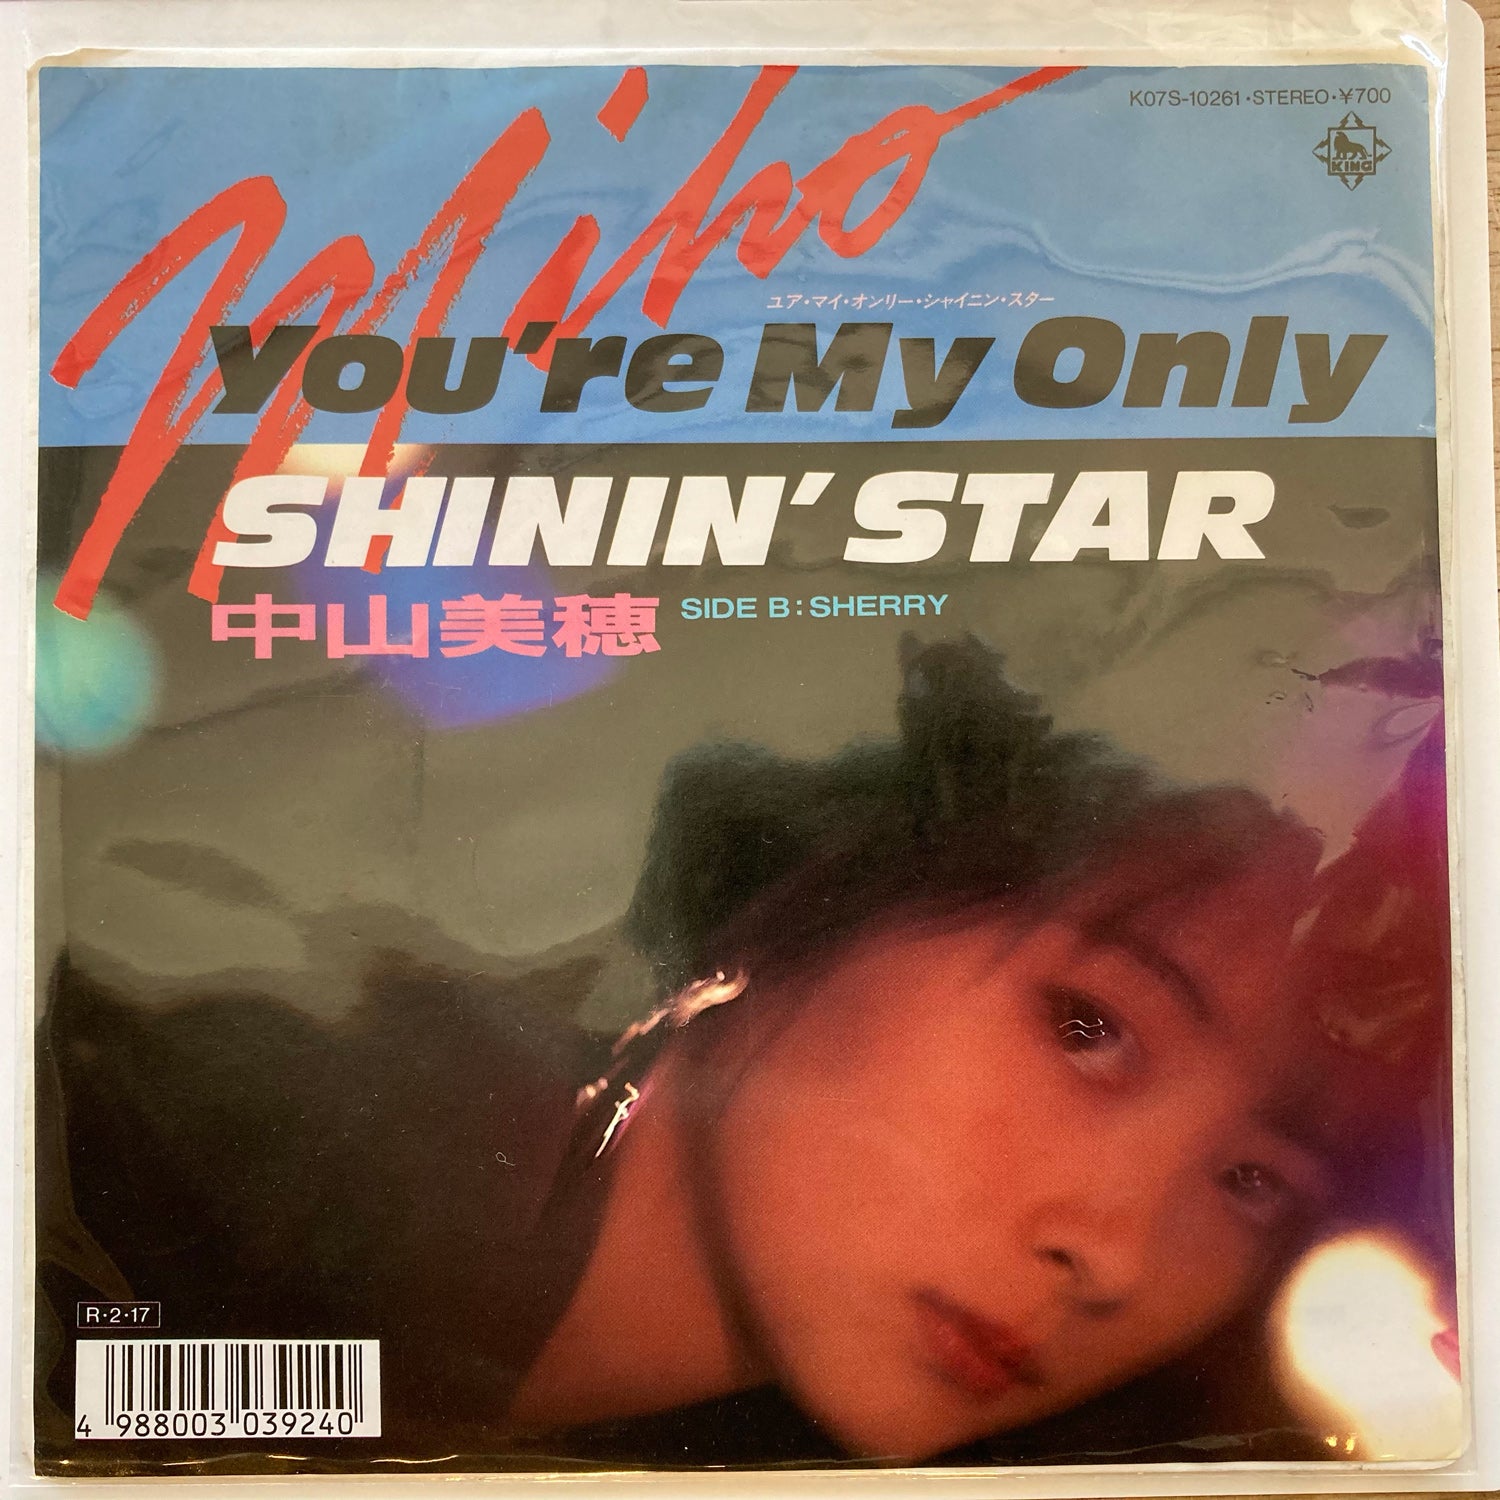 Miho - You're My Only Shinin' Star / Sherry (7")